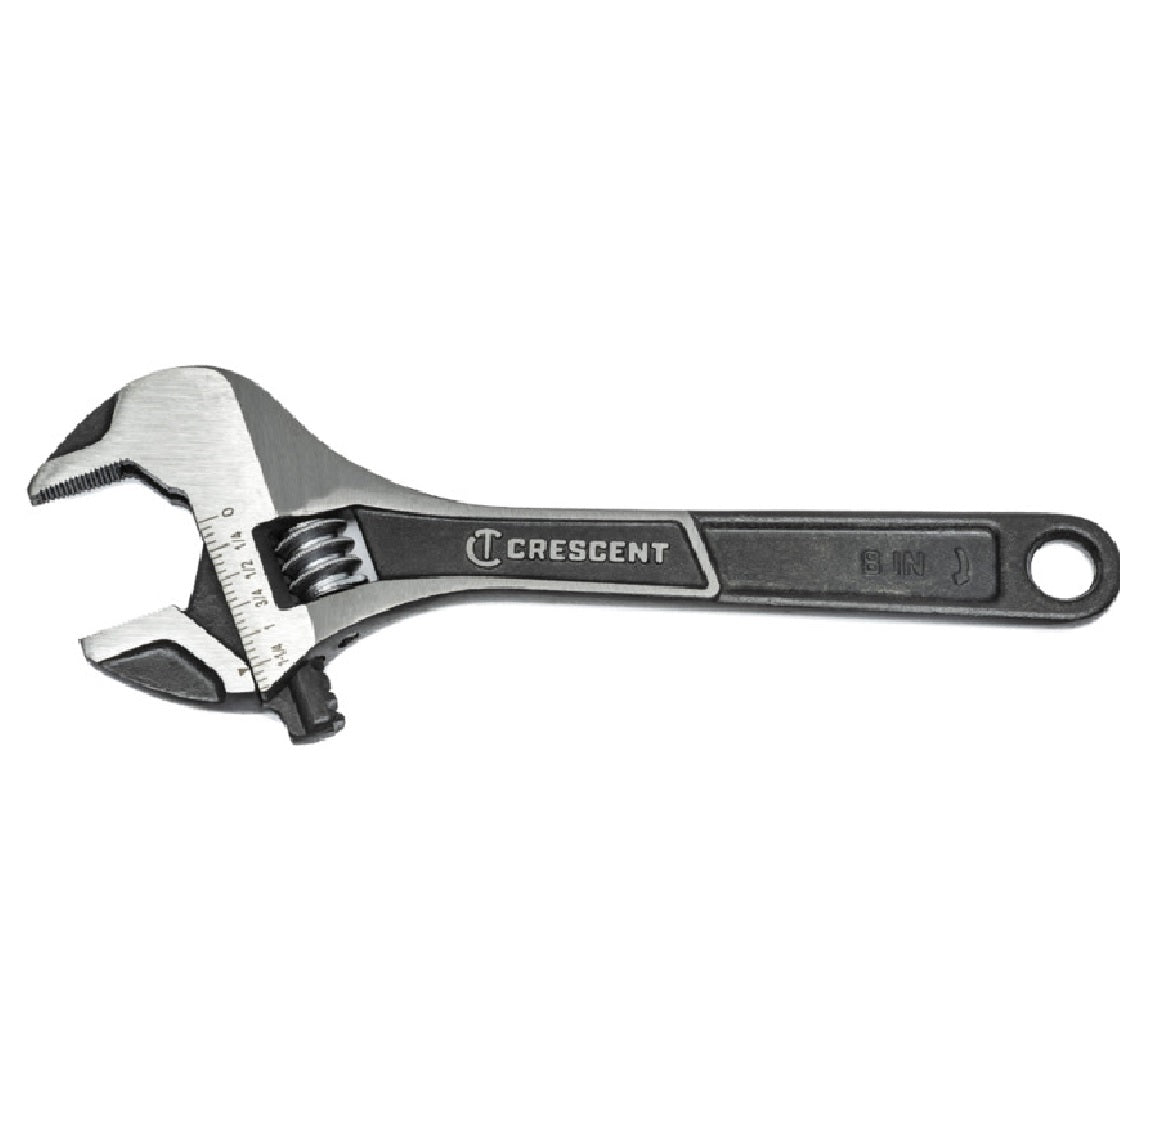 Crescent ATWJ28VS Adjustable Wrench, Alloy Steel